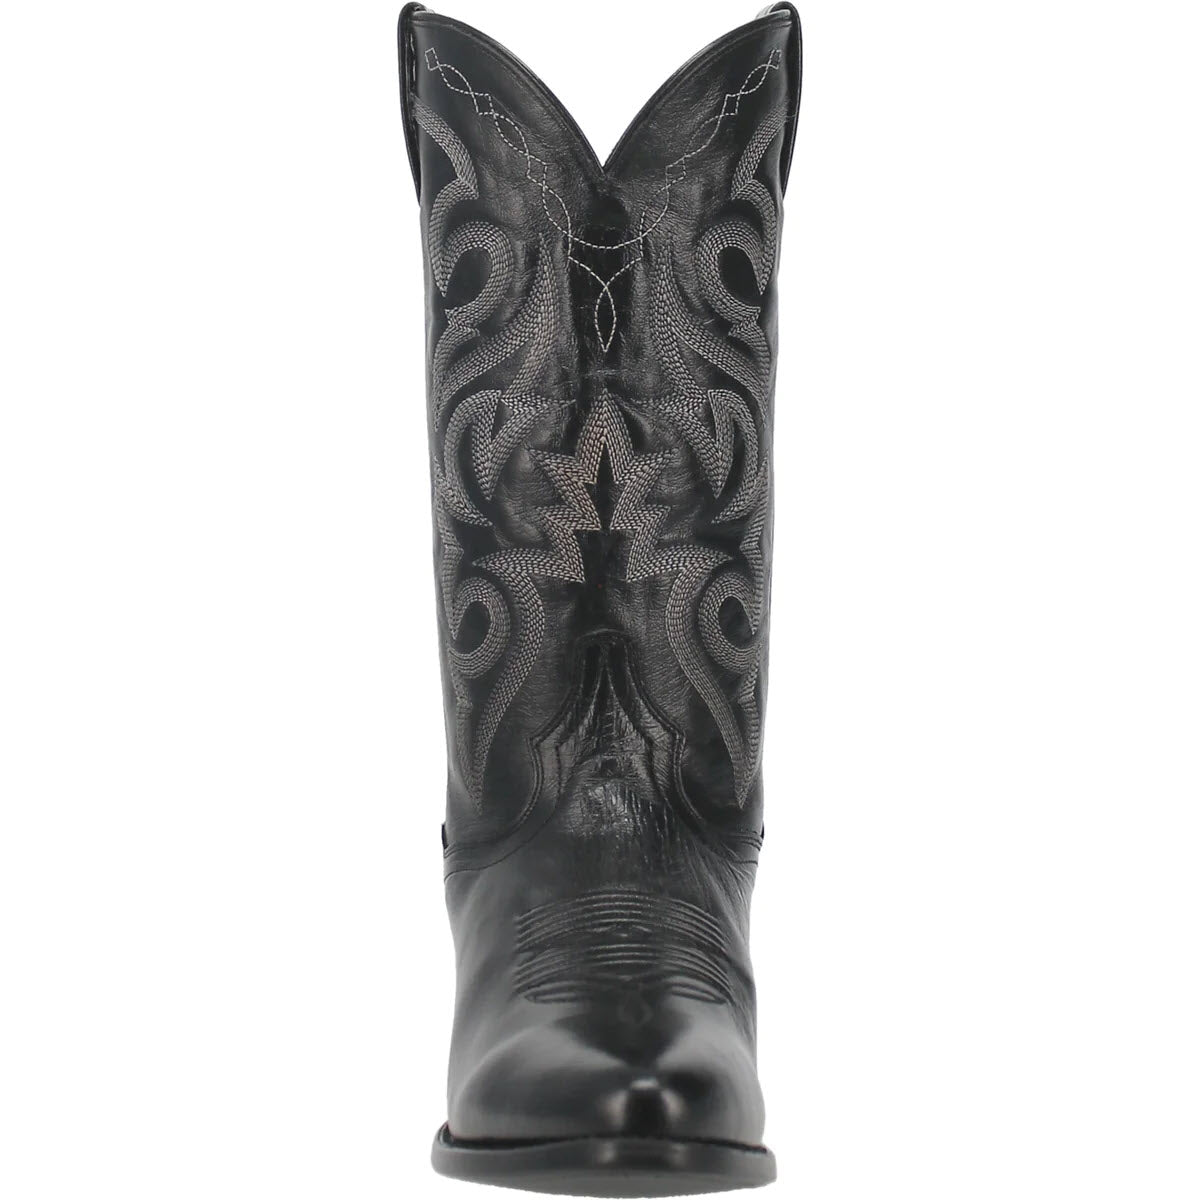 A black leather Dan Post Milwaukee 13 inch western boot with intricate embroidered designs on the shaft and a pointed toe, viewed from the front.